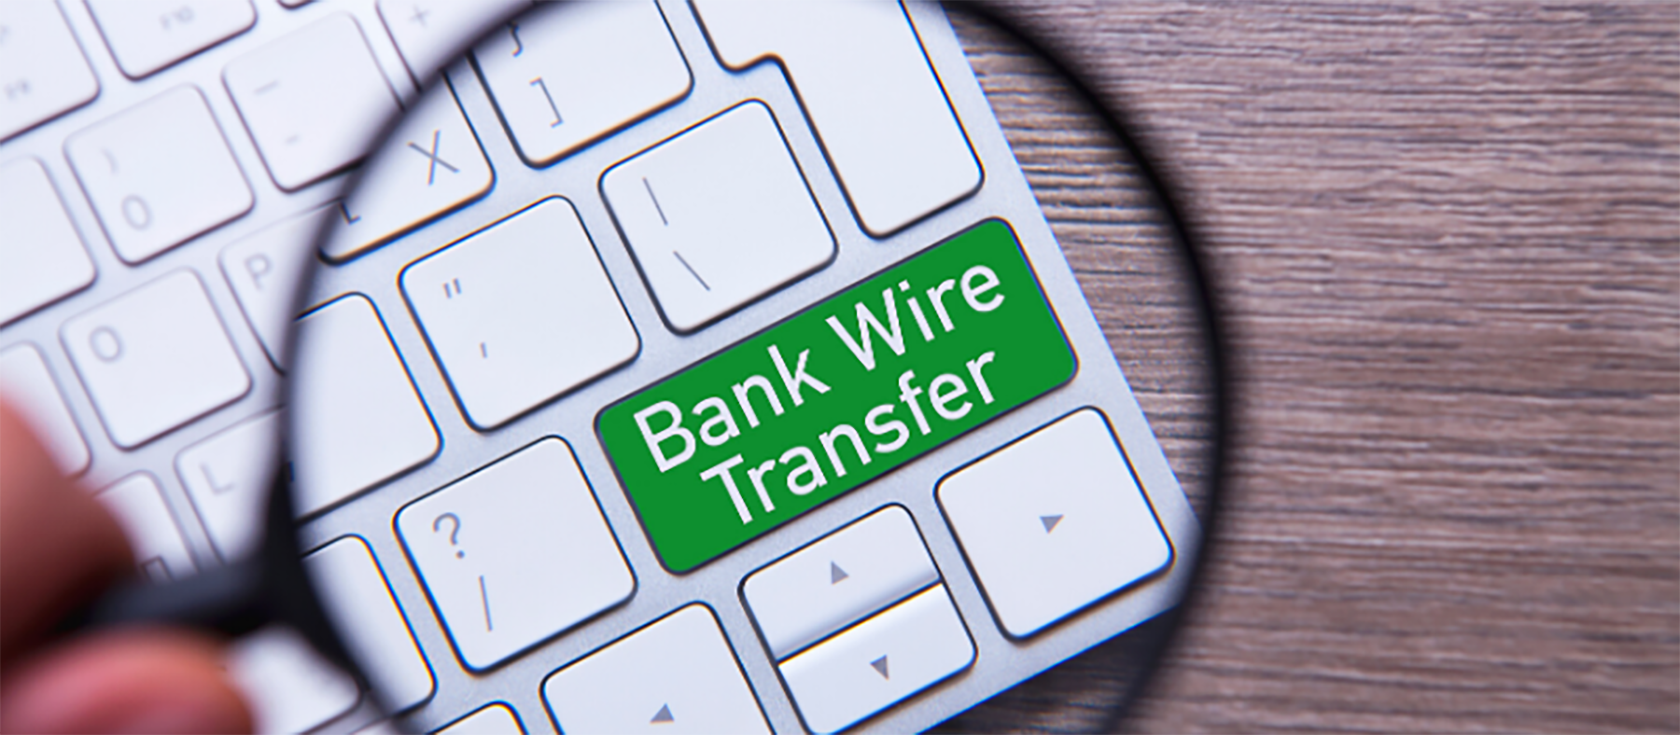 What You Need To Know About Wire Transfers | Brex